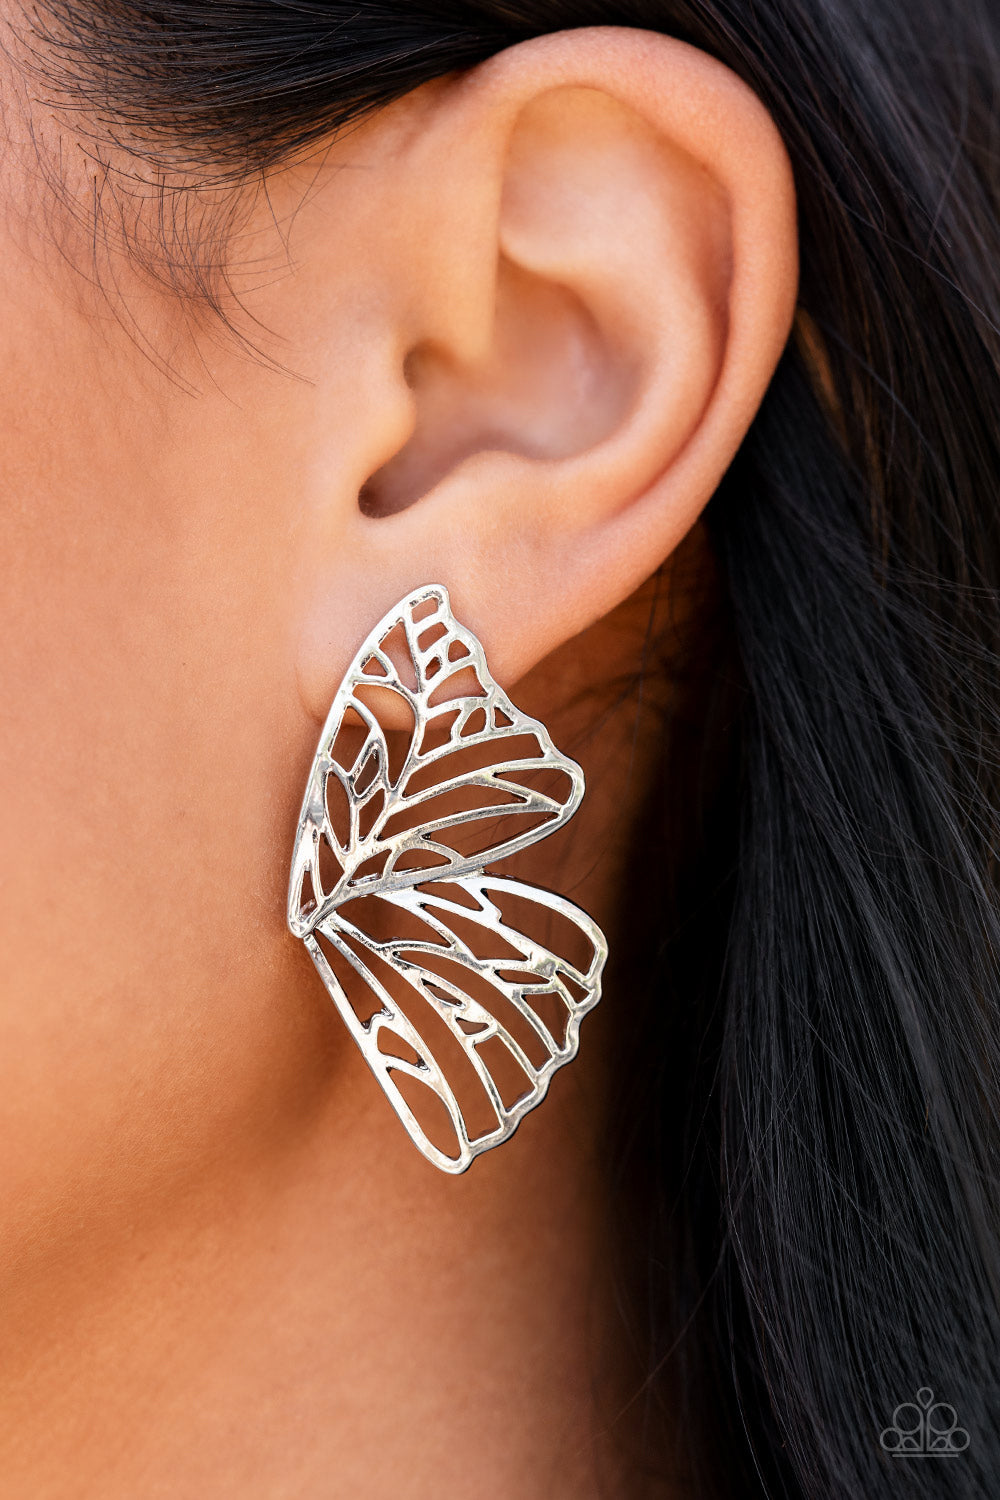 Butterfly Frills Silver Earring - Paparazzi Accessories  Shimmery silver bars delicately climb scalloped silver frames, coalescing into a whimsical butterfly wing. Earring attaches to a standard post fitting.  All Paparazzi Accessories are lead free and nickel free!  Sold as one pair of double-sided post earrings.